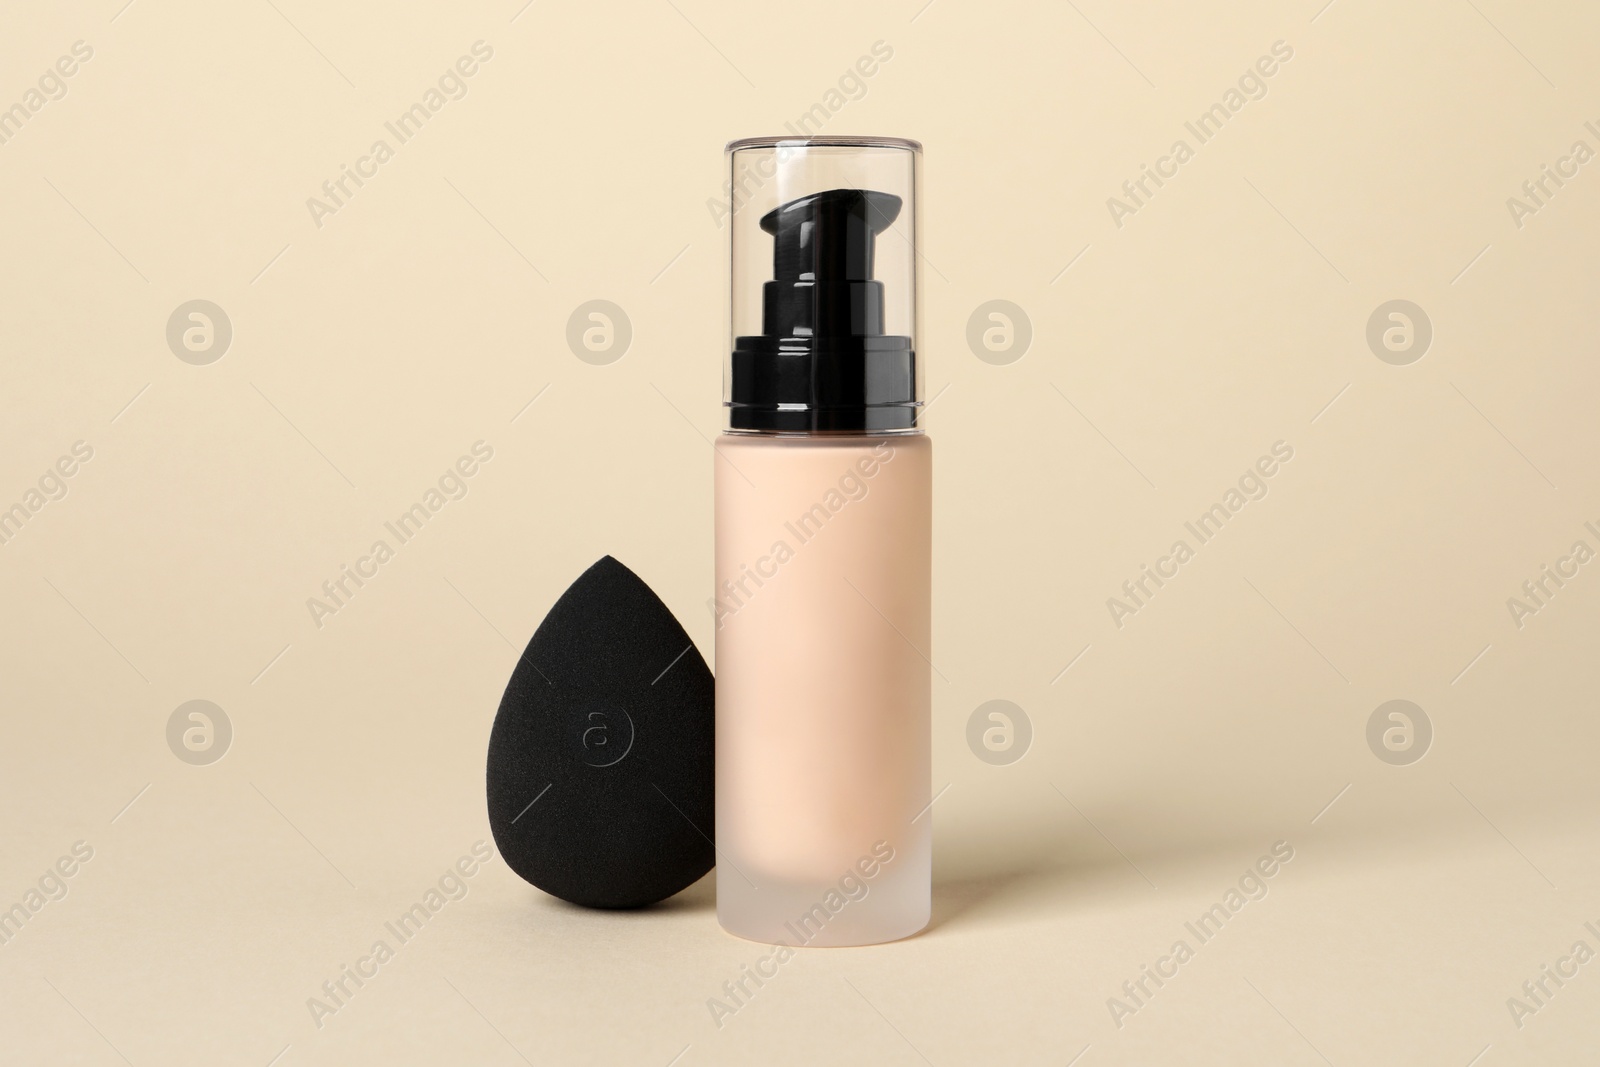 Photo of Bottle of skin foundation and sponge on beige background. Makeup product